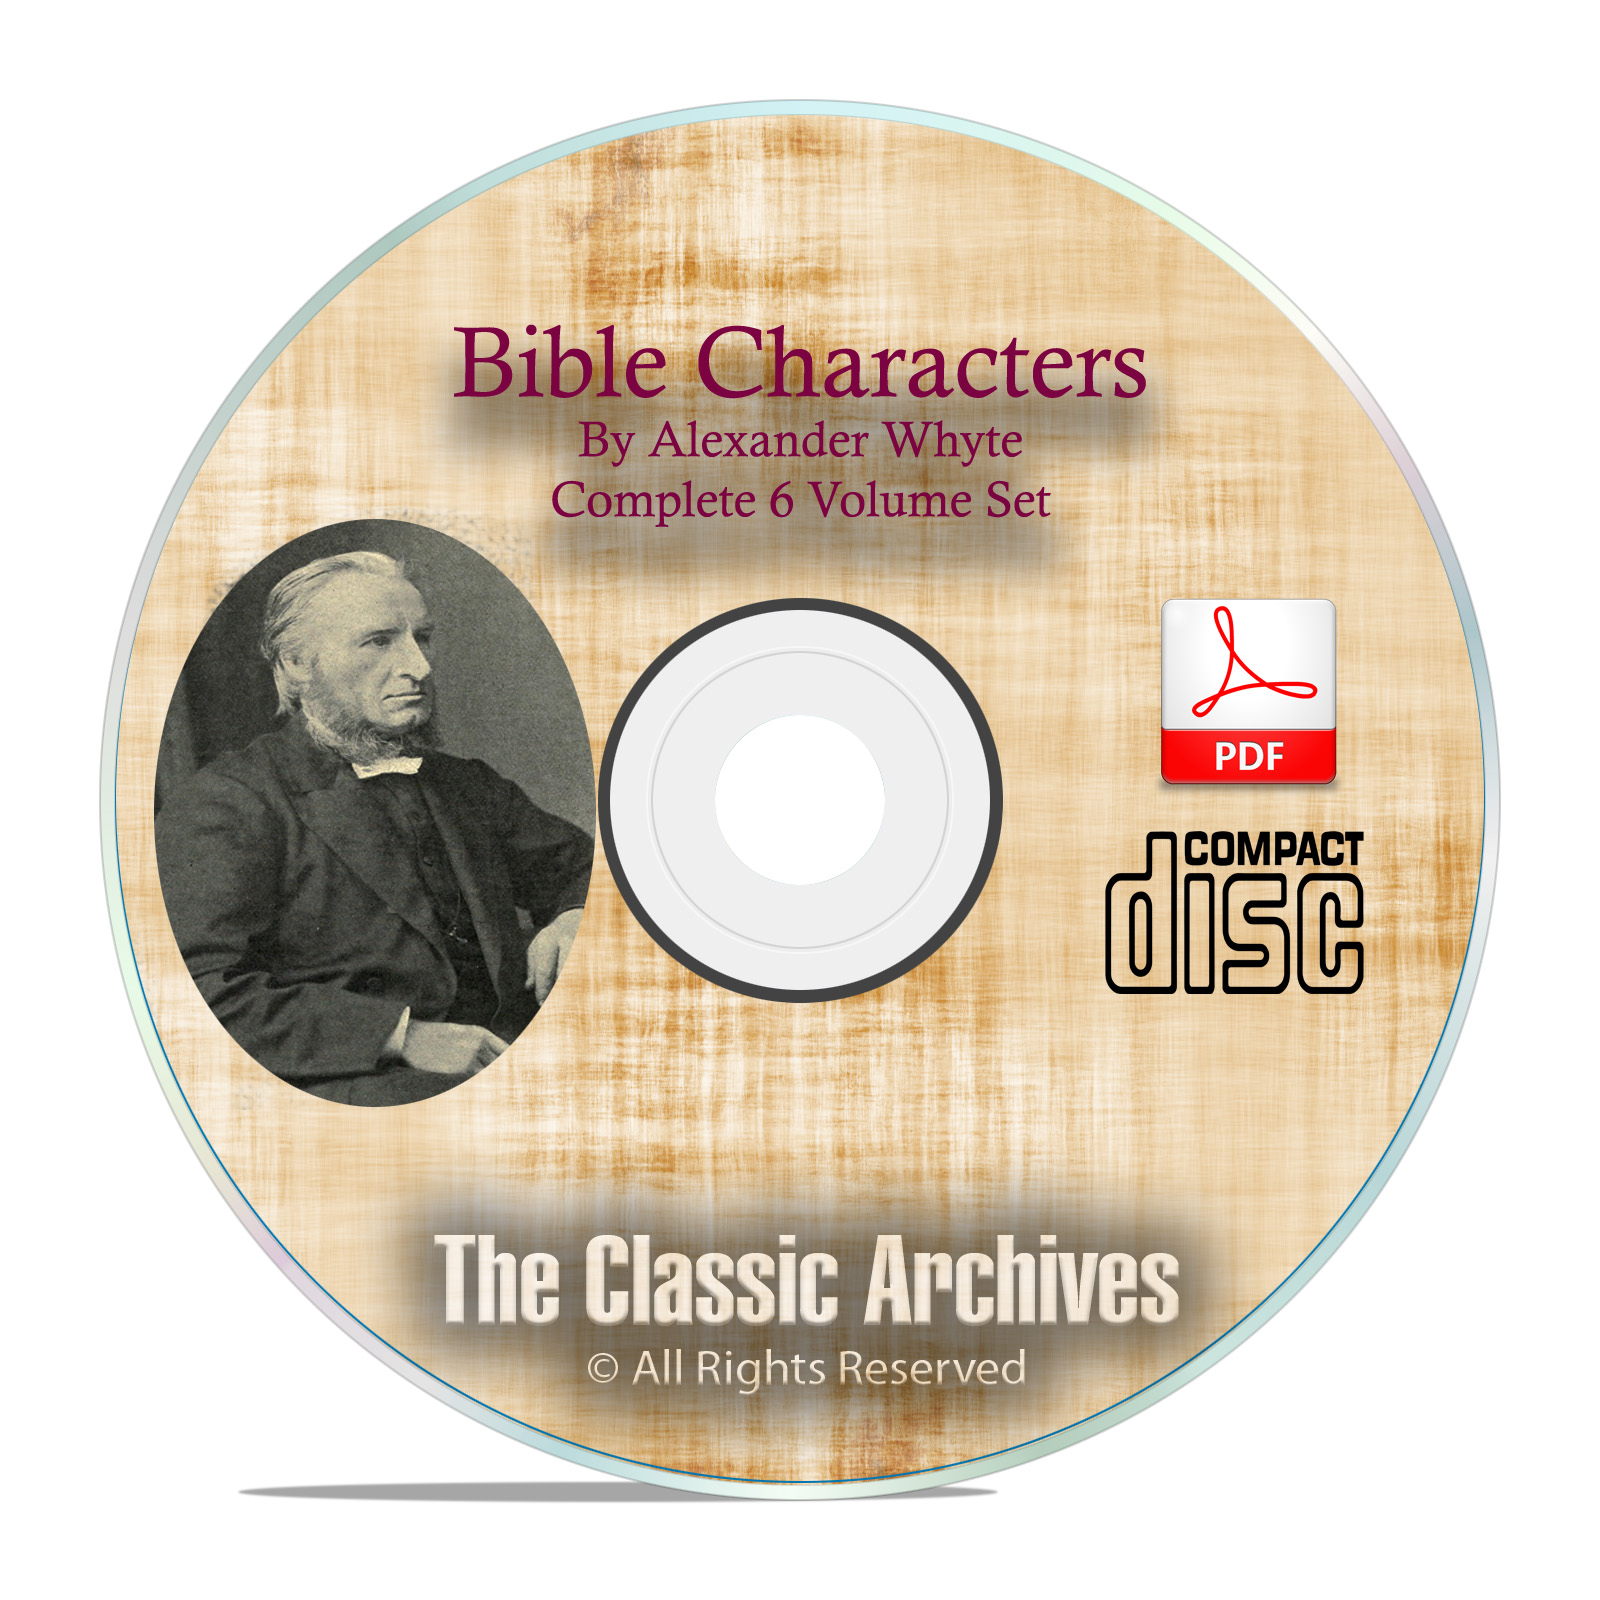 BIBLE CHARACTERS, by Alexander Whyte, Scripture Commentary, Full Set on CD - Click Image to Close